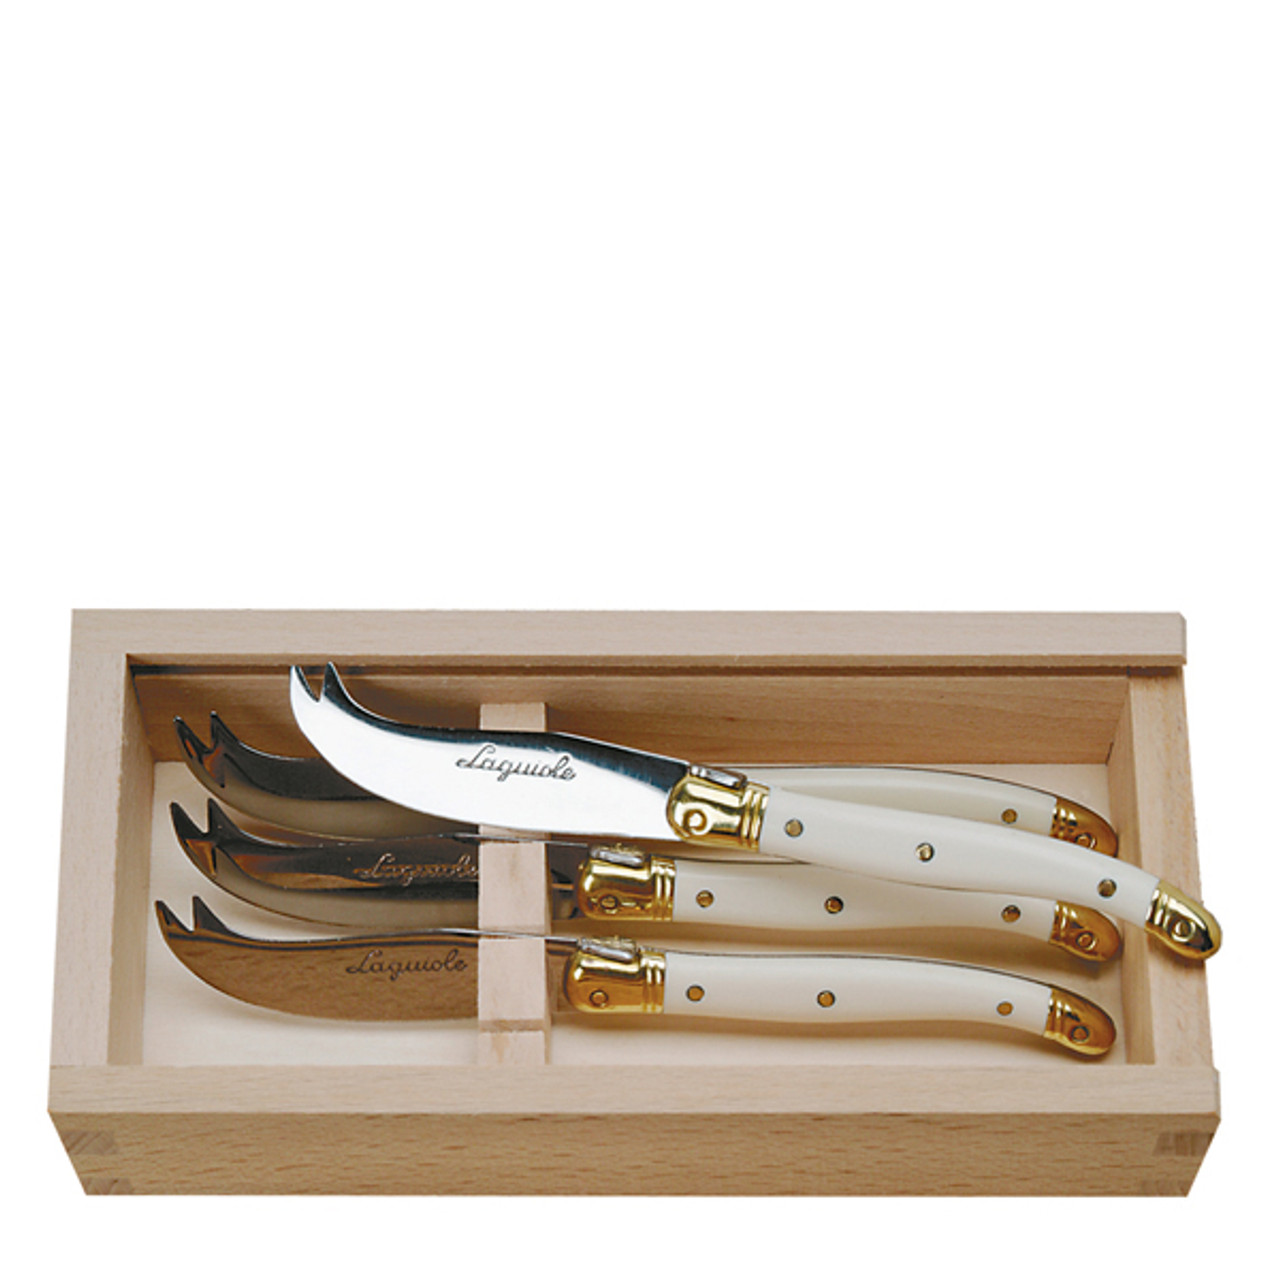 Chateau Wood Handled Cheese Knives - Set of 4